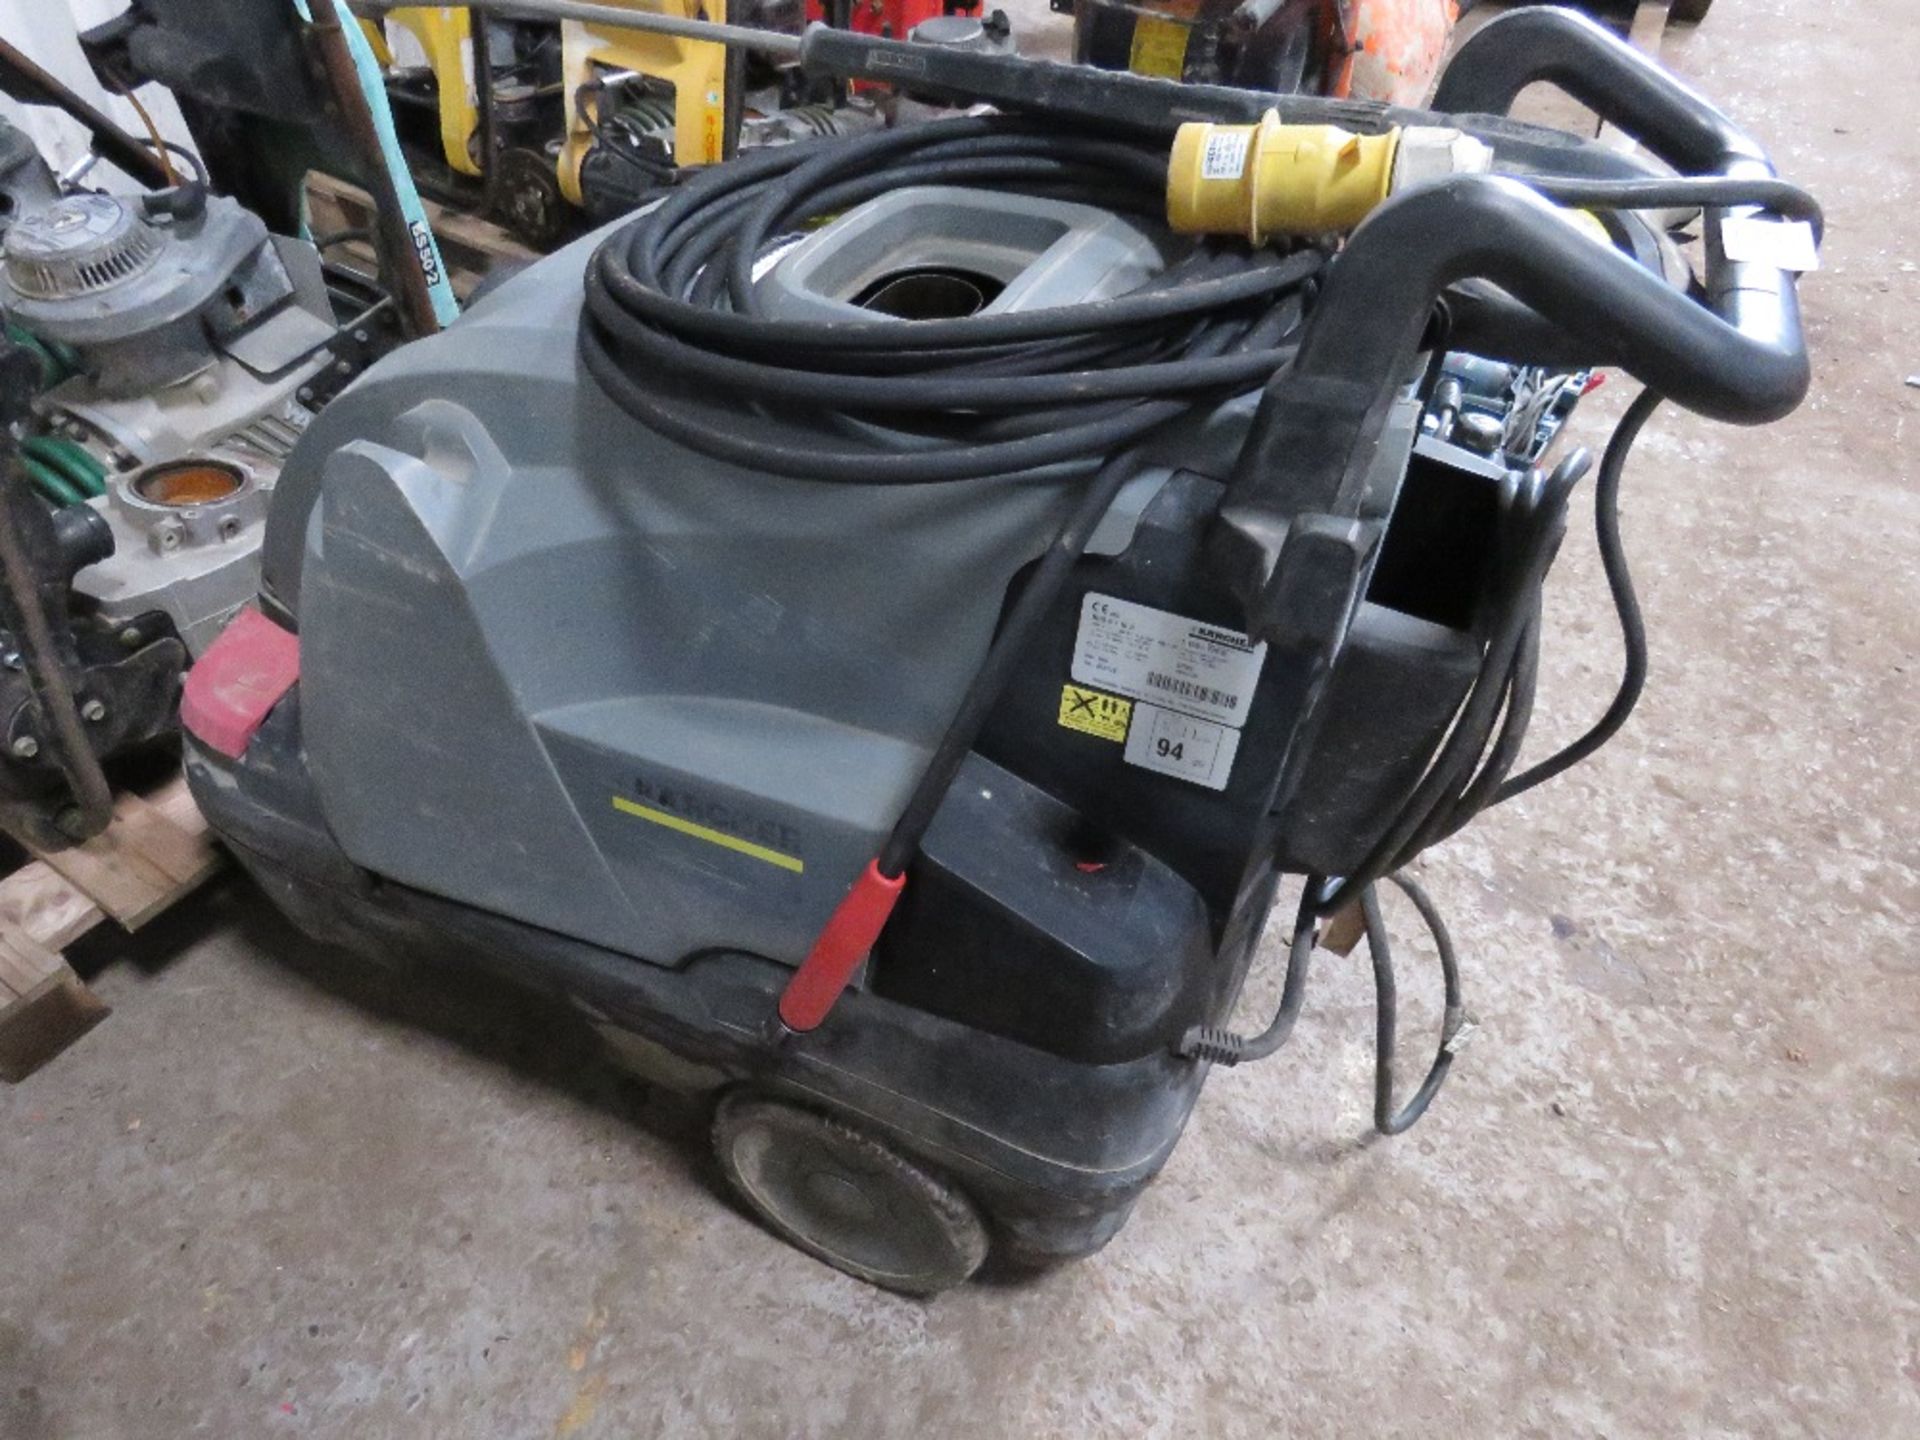 KARCHER HDS 6110C 110VOLT STEAM CLEANER. YEAR 2014, UNTESTED, CONDITION UNKNOWN All items "sold as